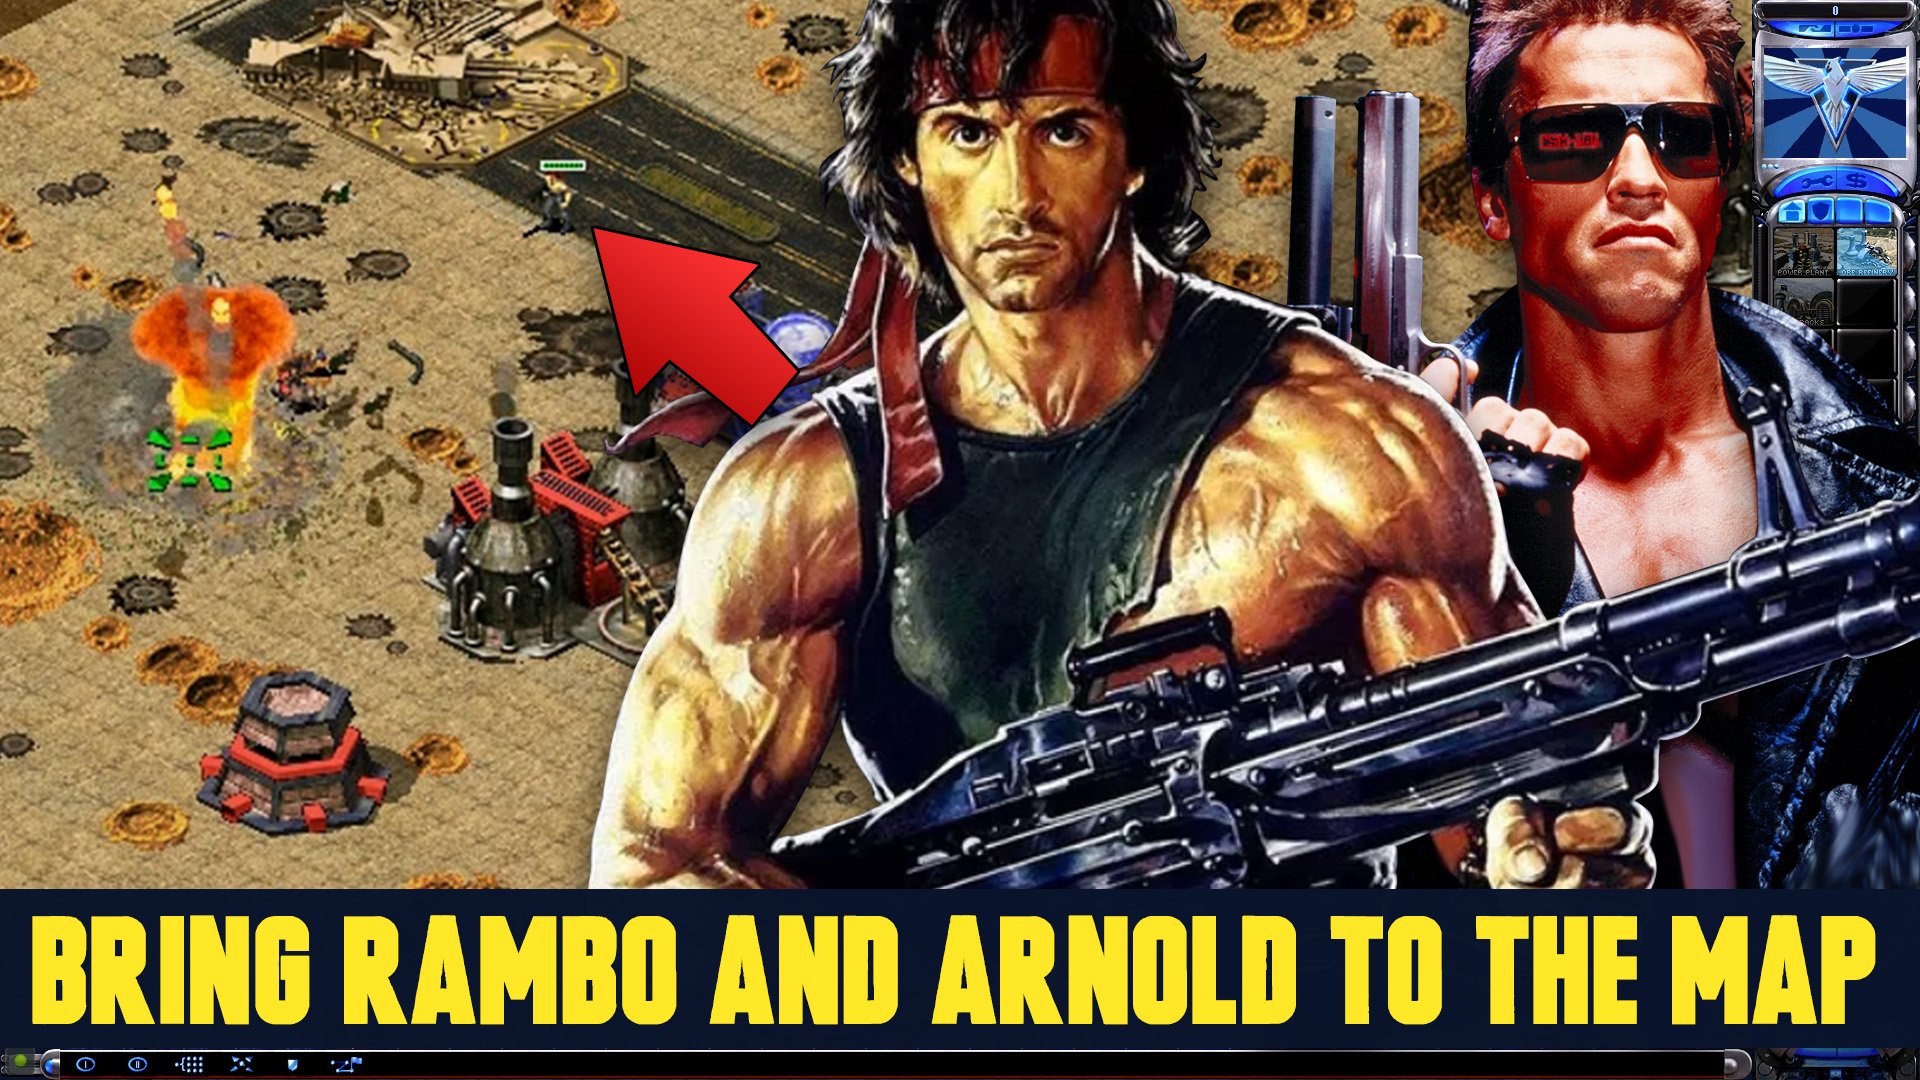 Final alert 2 Tutorial - How to bring Rambo and Arnold the map? - RA2/YR Maps - CnCNet Community Forums